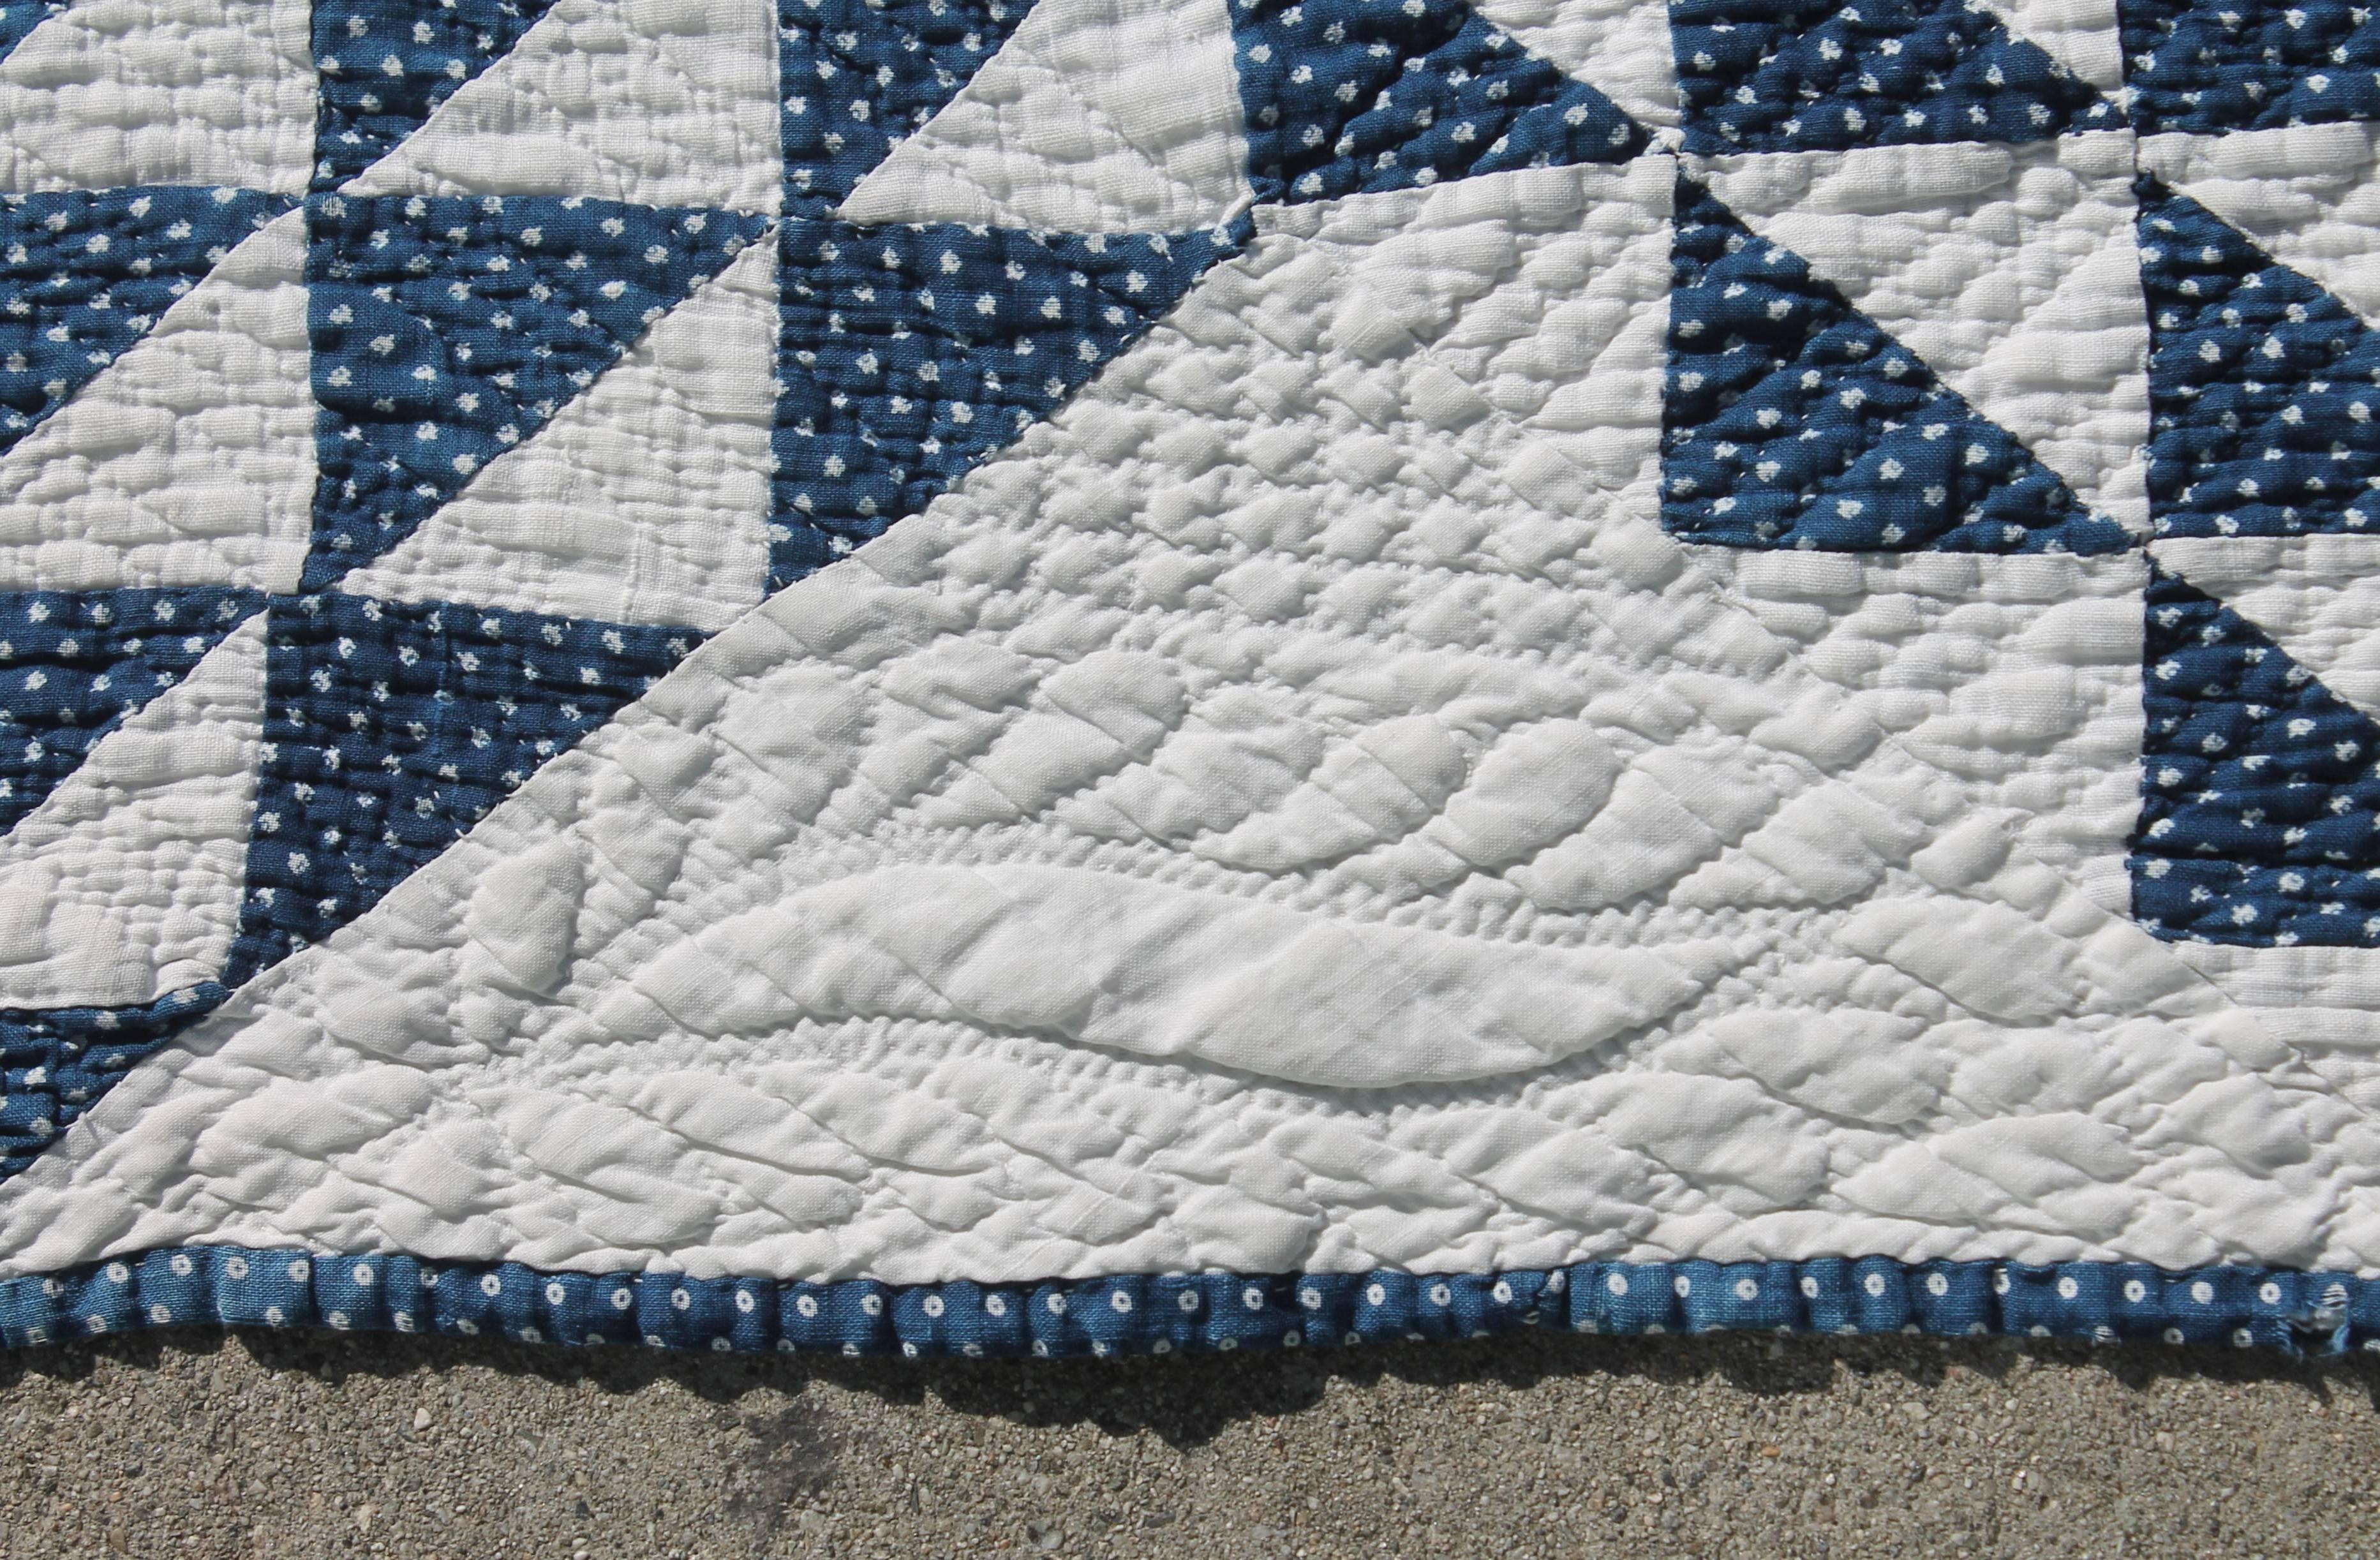 Hand-Crafted Vintage Quilt Blue and White Ocean Waves